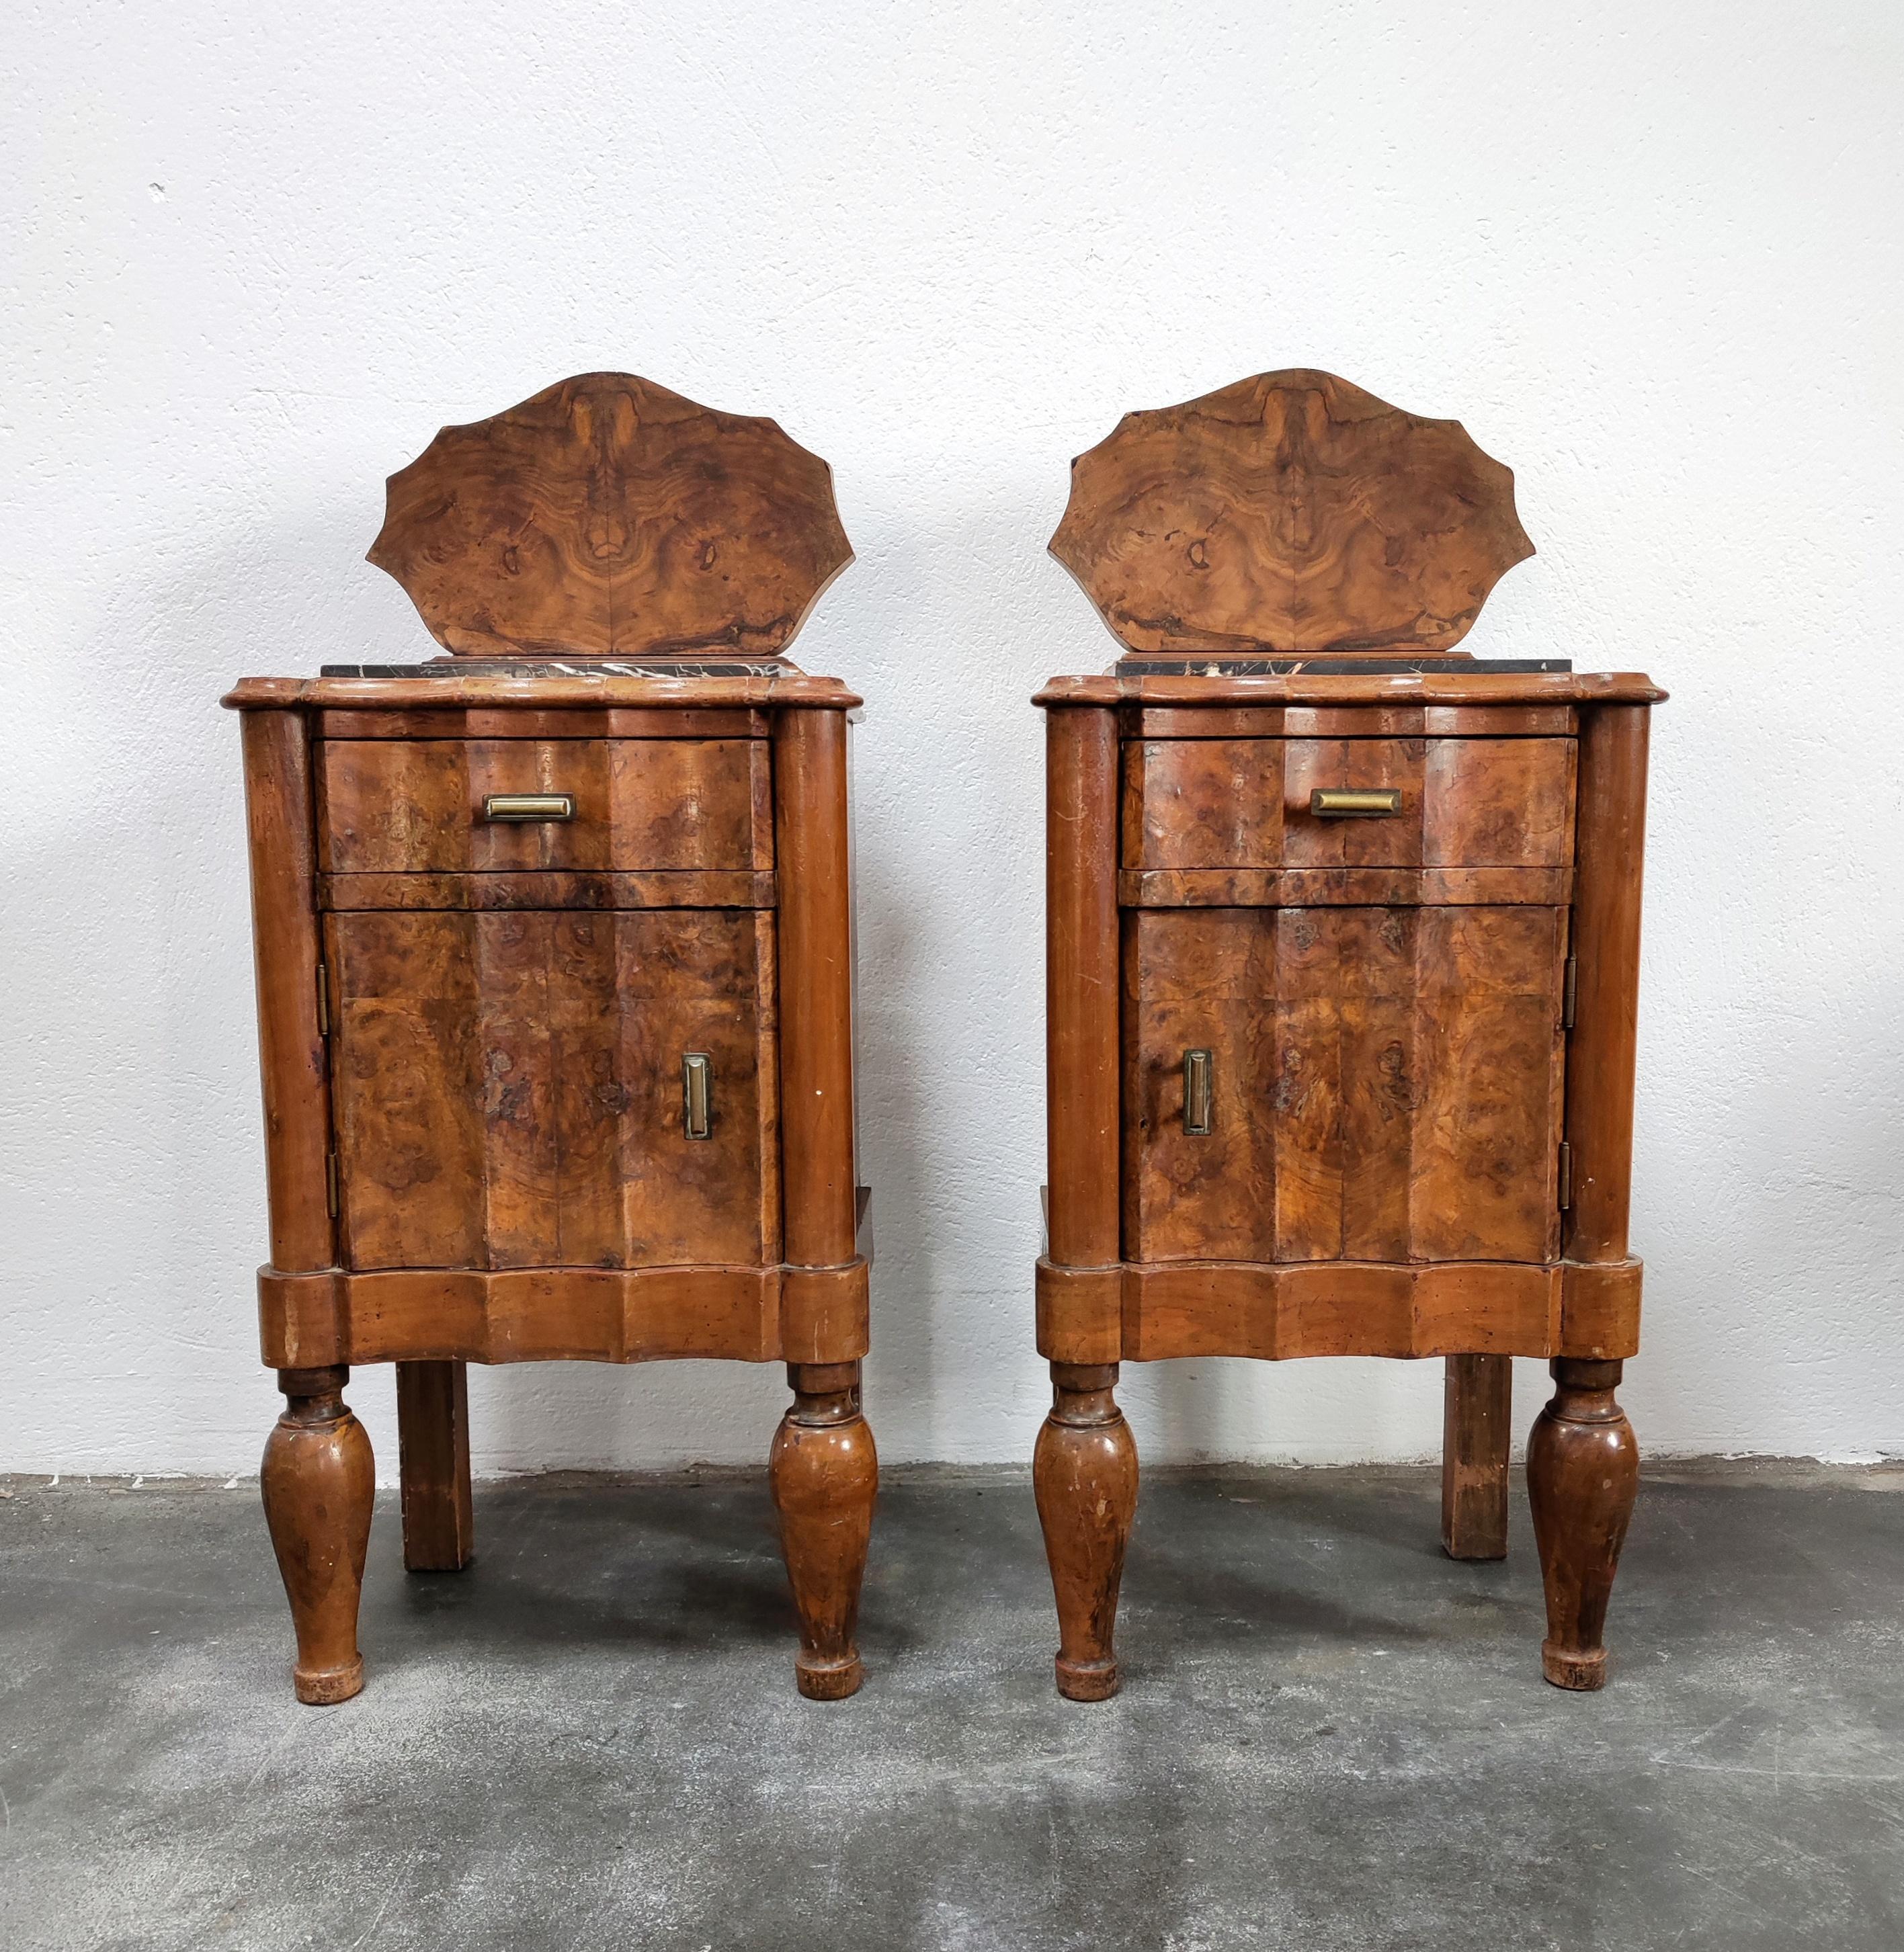 Early 20th Century Pair of Pettite Art Deco Nightstands in Walnut Burl and Marble, Italy, 1920s For Sale